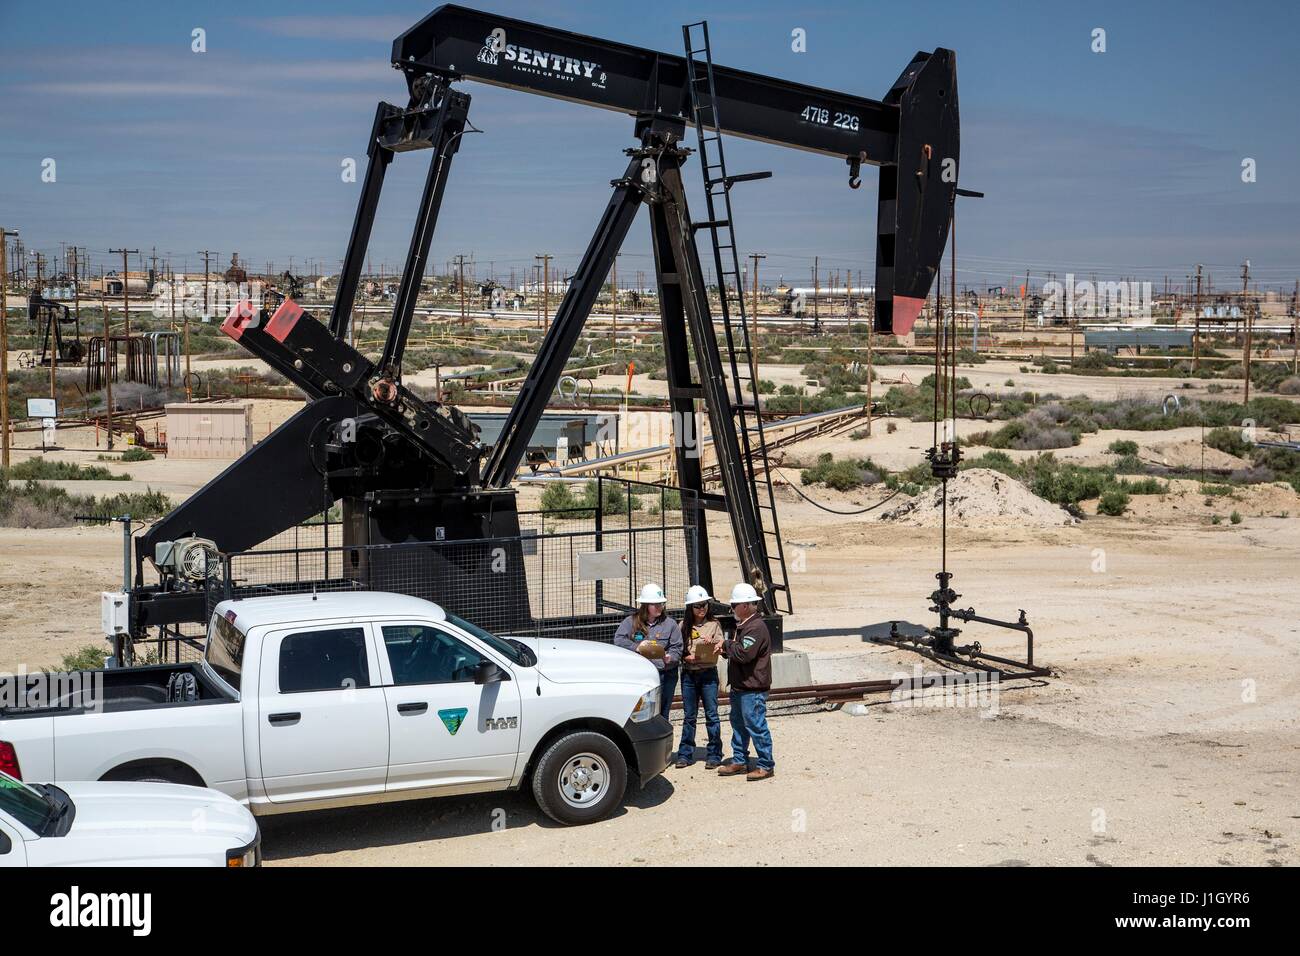 A federal Bureau of Land Management team inspects pump jacks in the Kern River Oil Field along the San Joaquin Valley April 11, 2017 in Bakersfield, California. The oil and gas wells that cover the area are on public land leased by the federal government to private industry. Stock Photo